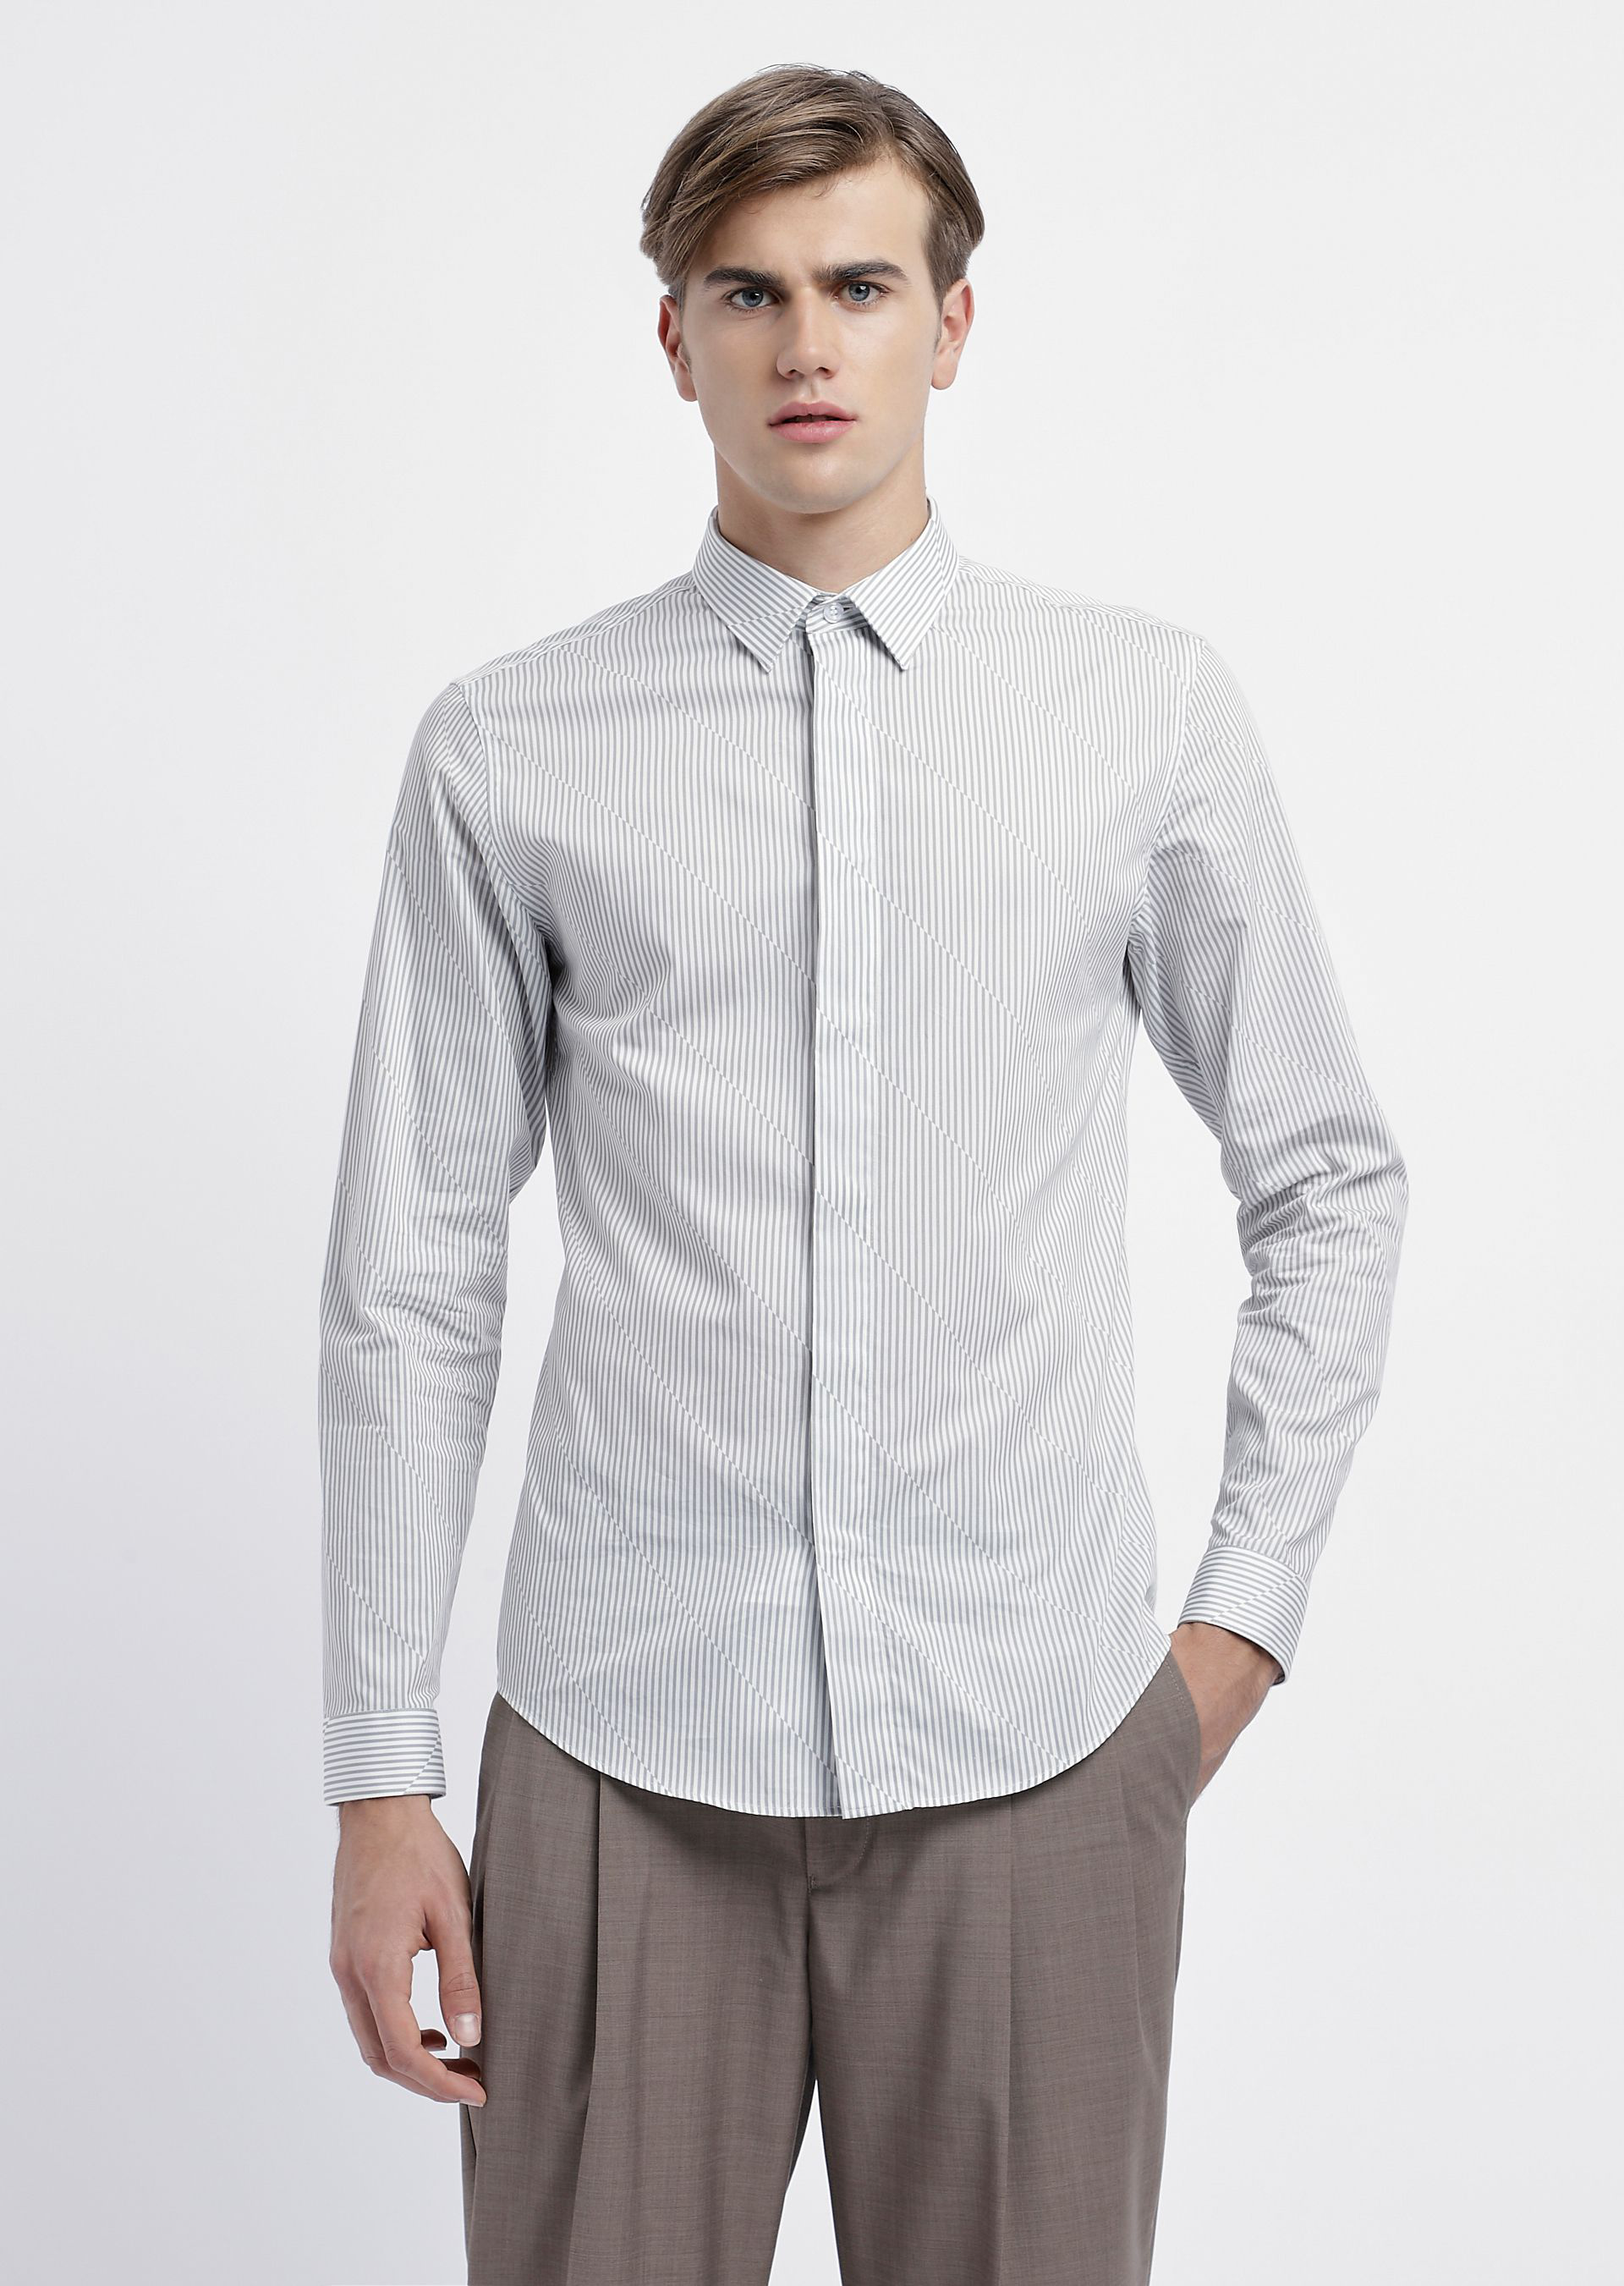 Emporio Armani Casual Shirts - Item 38808874 In Pattern | ModeSens